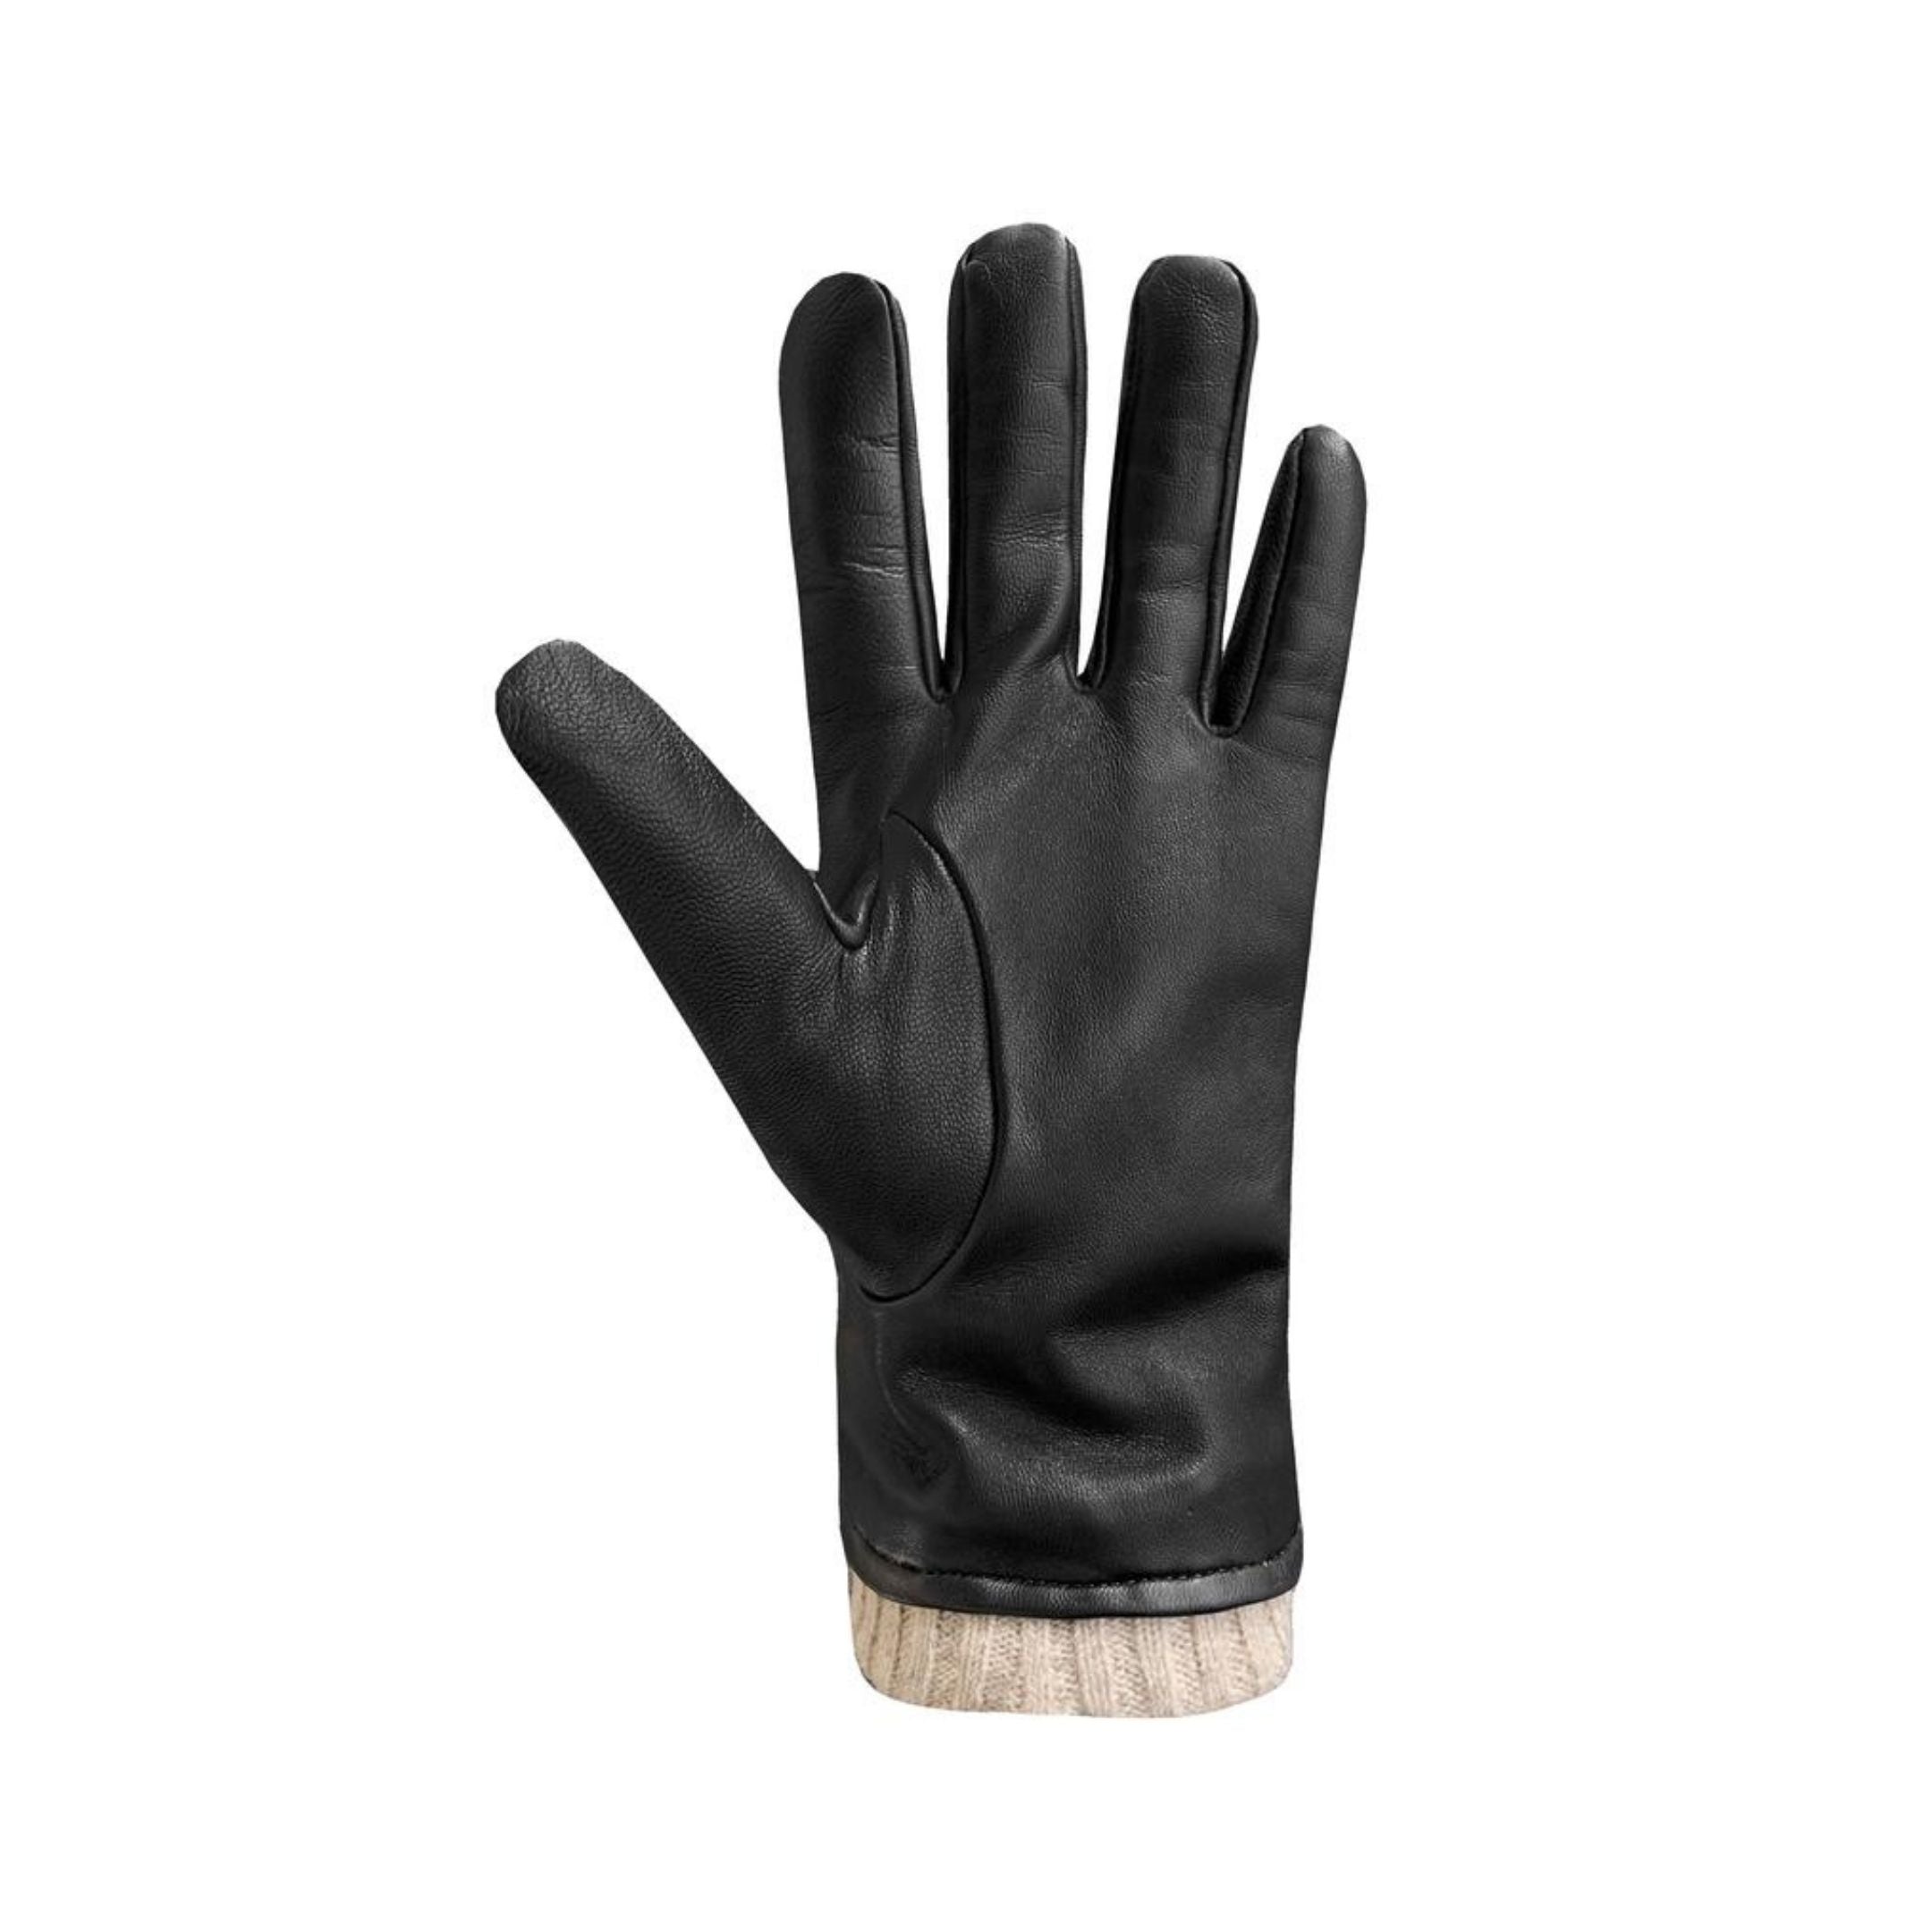 Palm side of black leather gloves with grey knit cuffs. 